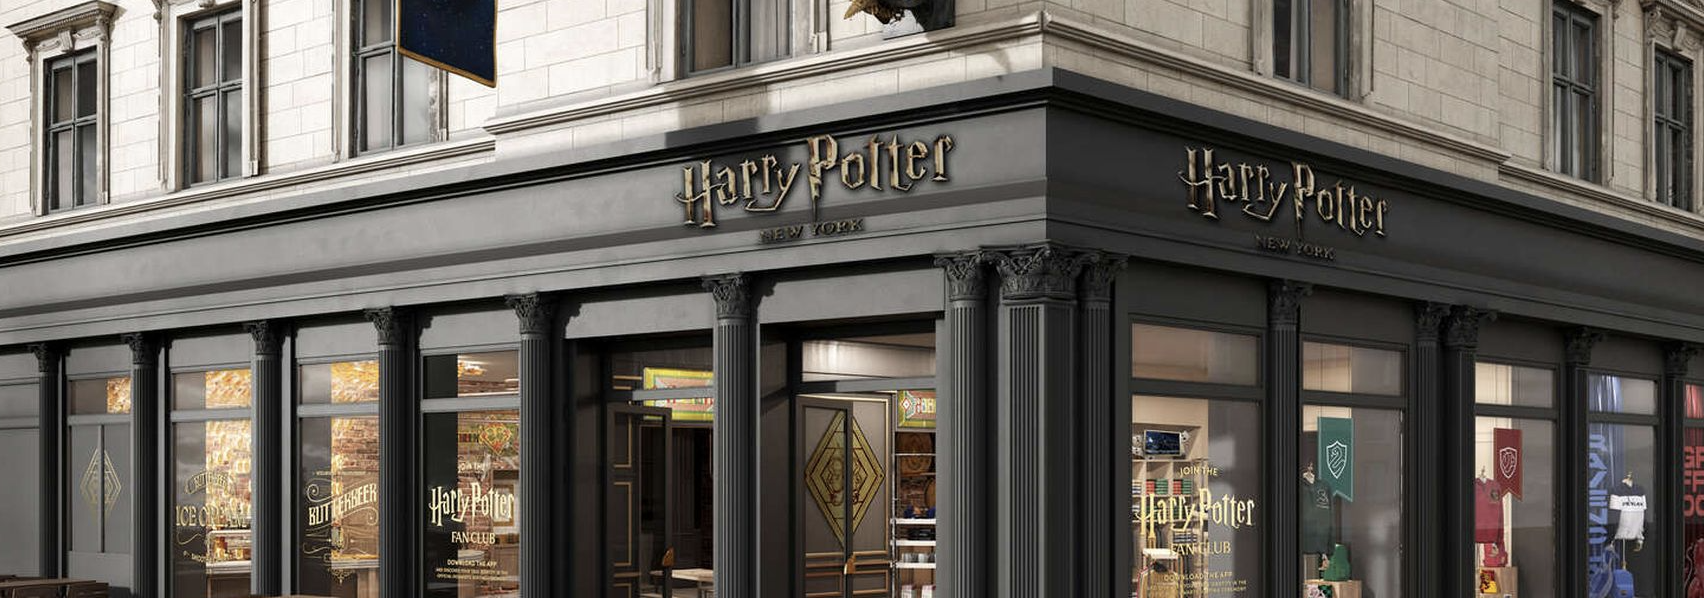 Crazy Harry Potter? Then should visit this store in New York - Netherlands News Live